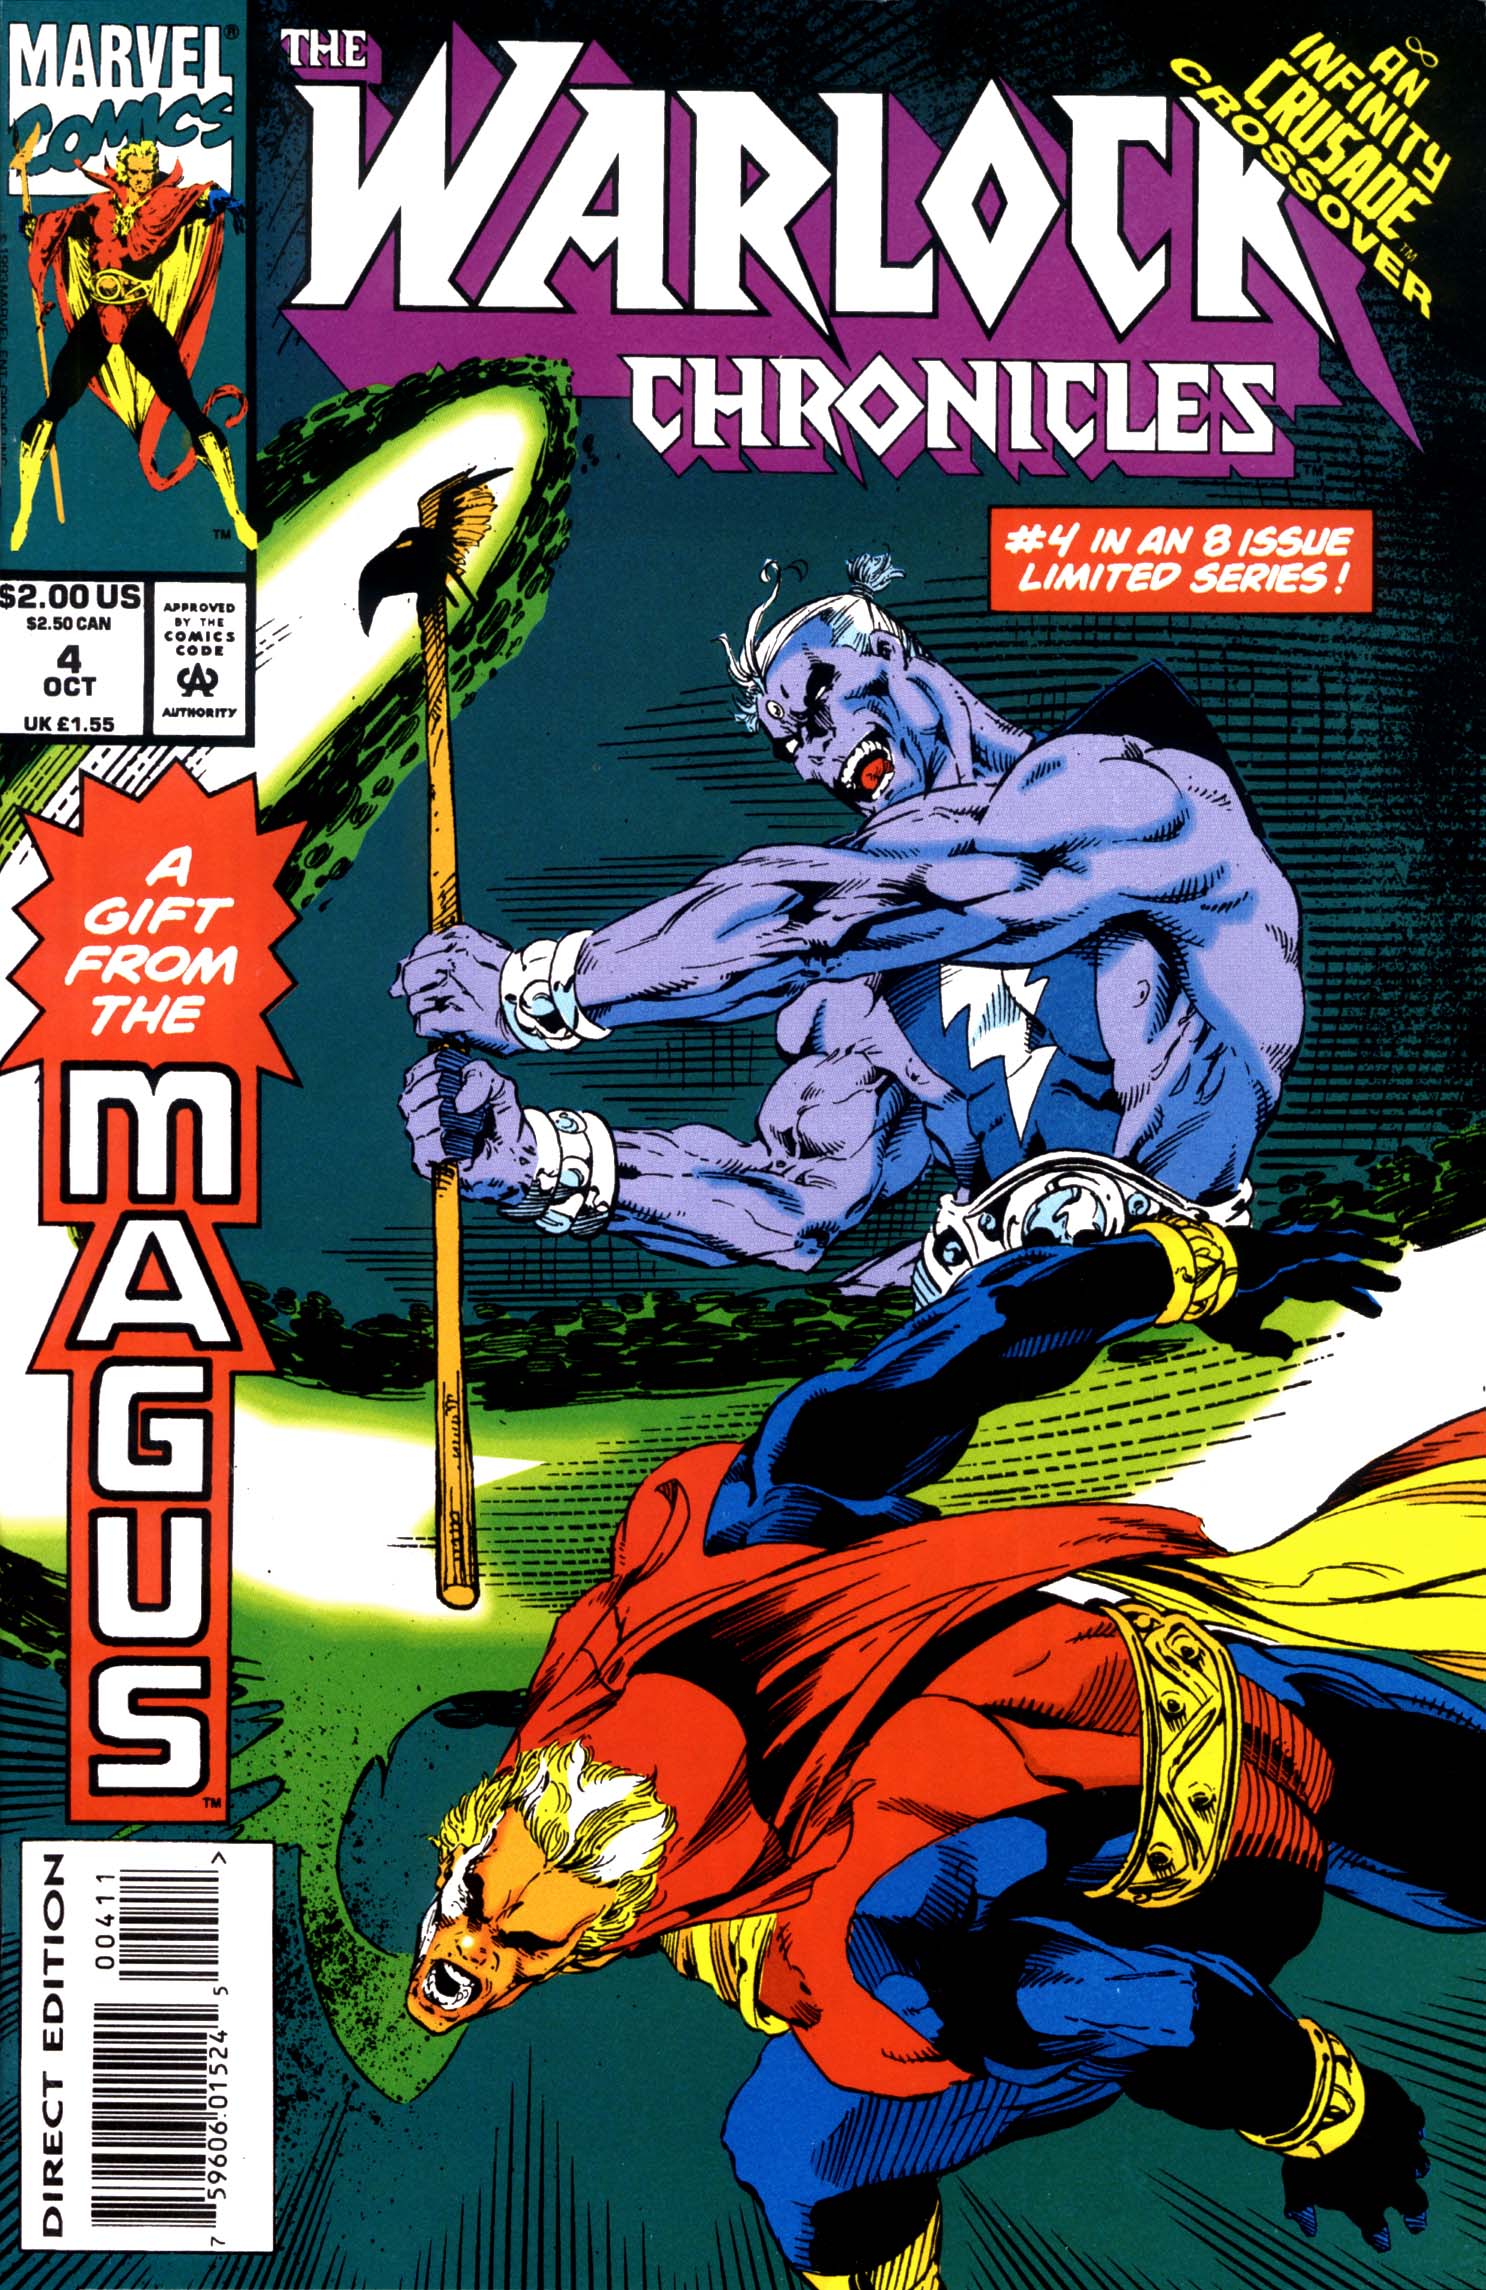 Read online Warlock Chronicles comic -  Issue #4 - 1